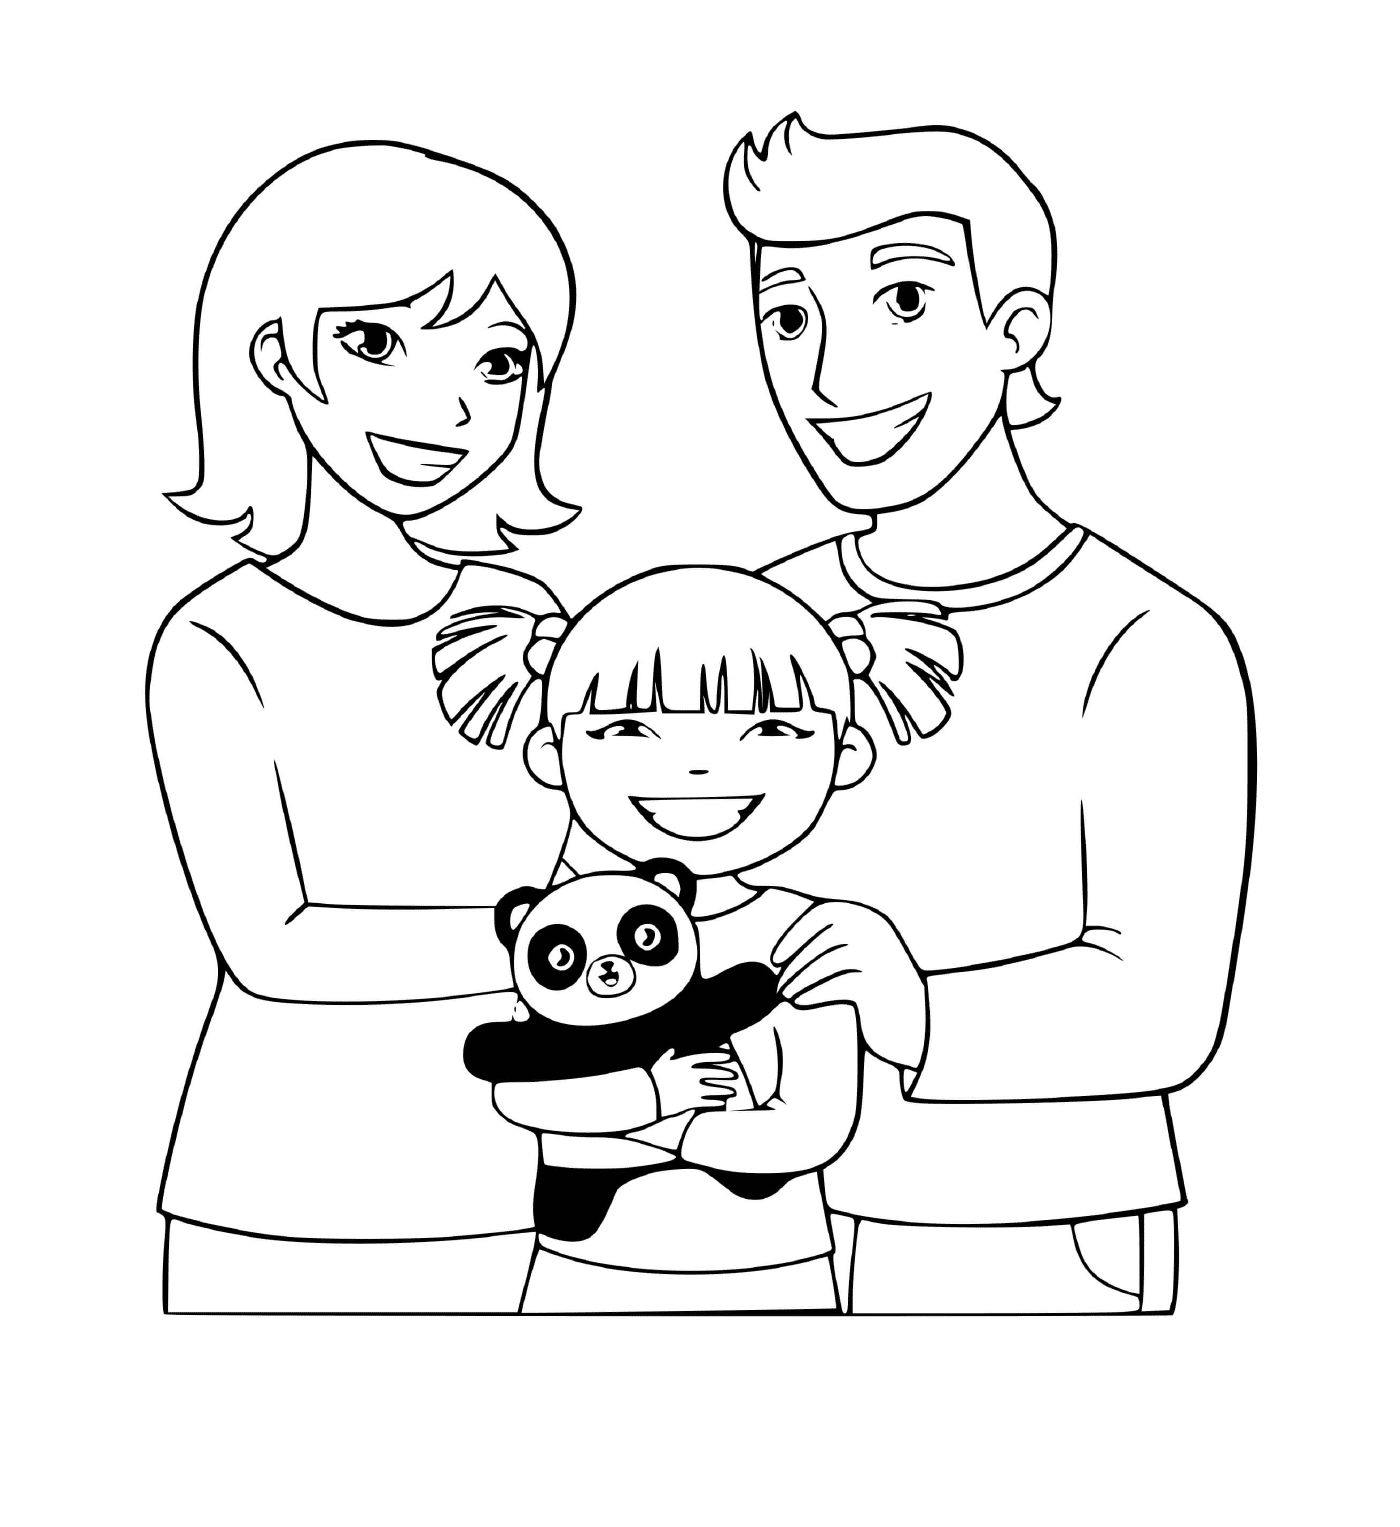  A family with their only daughter and her plush panda 